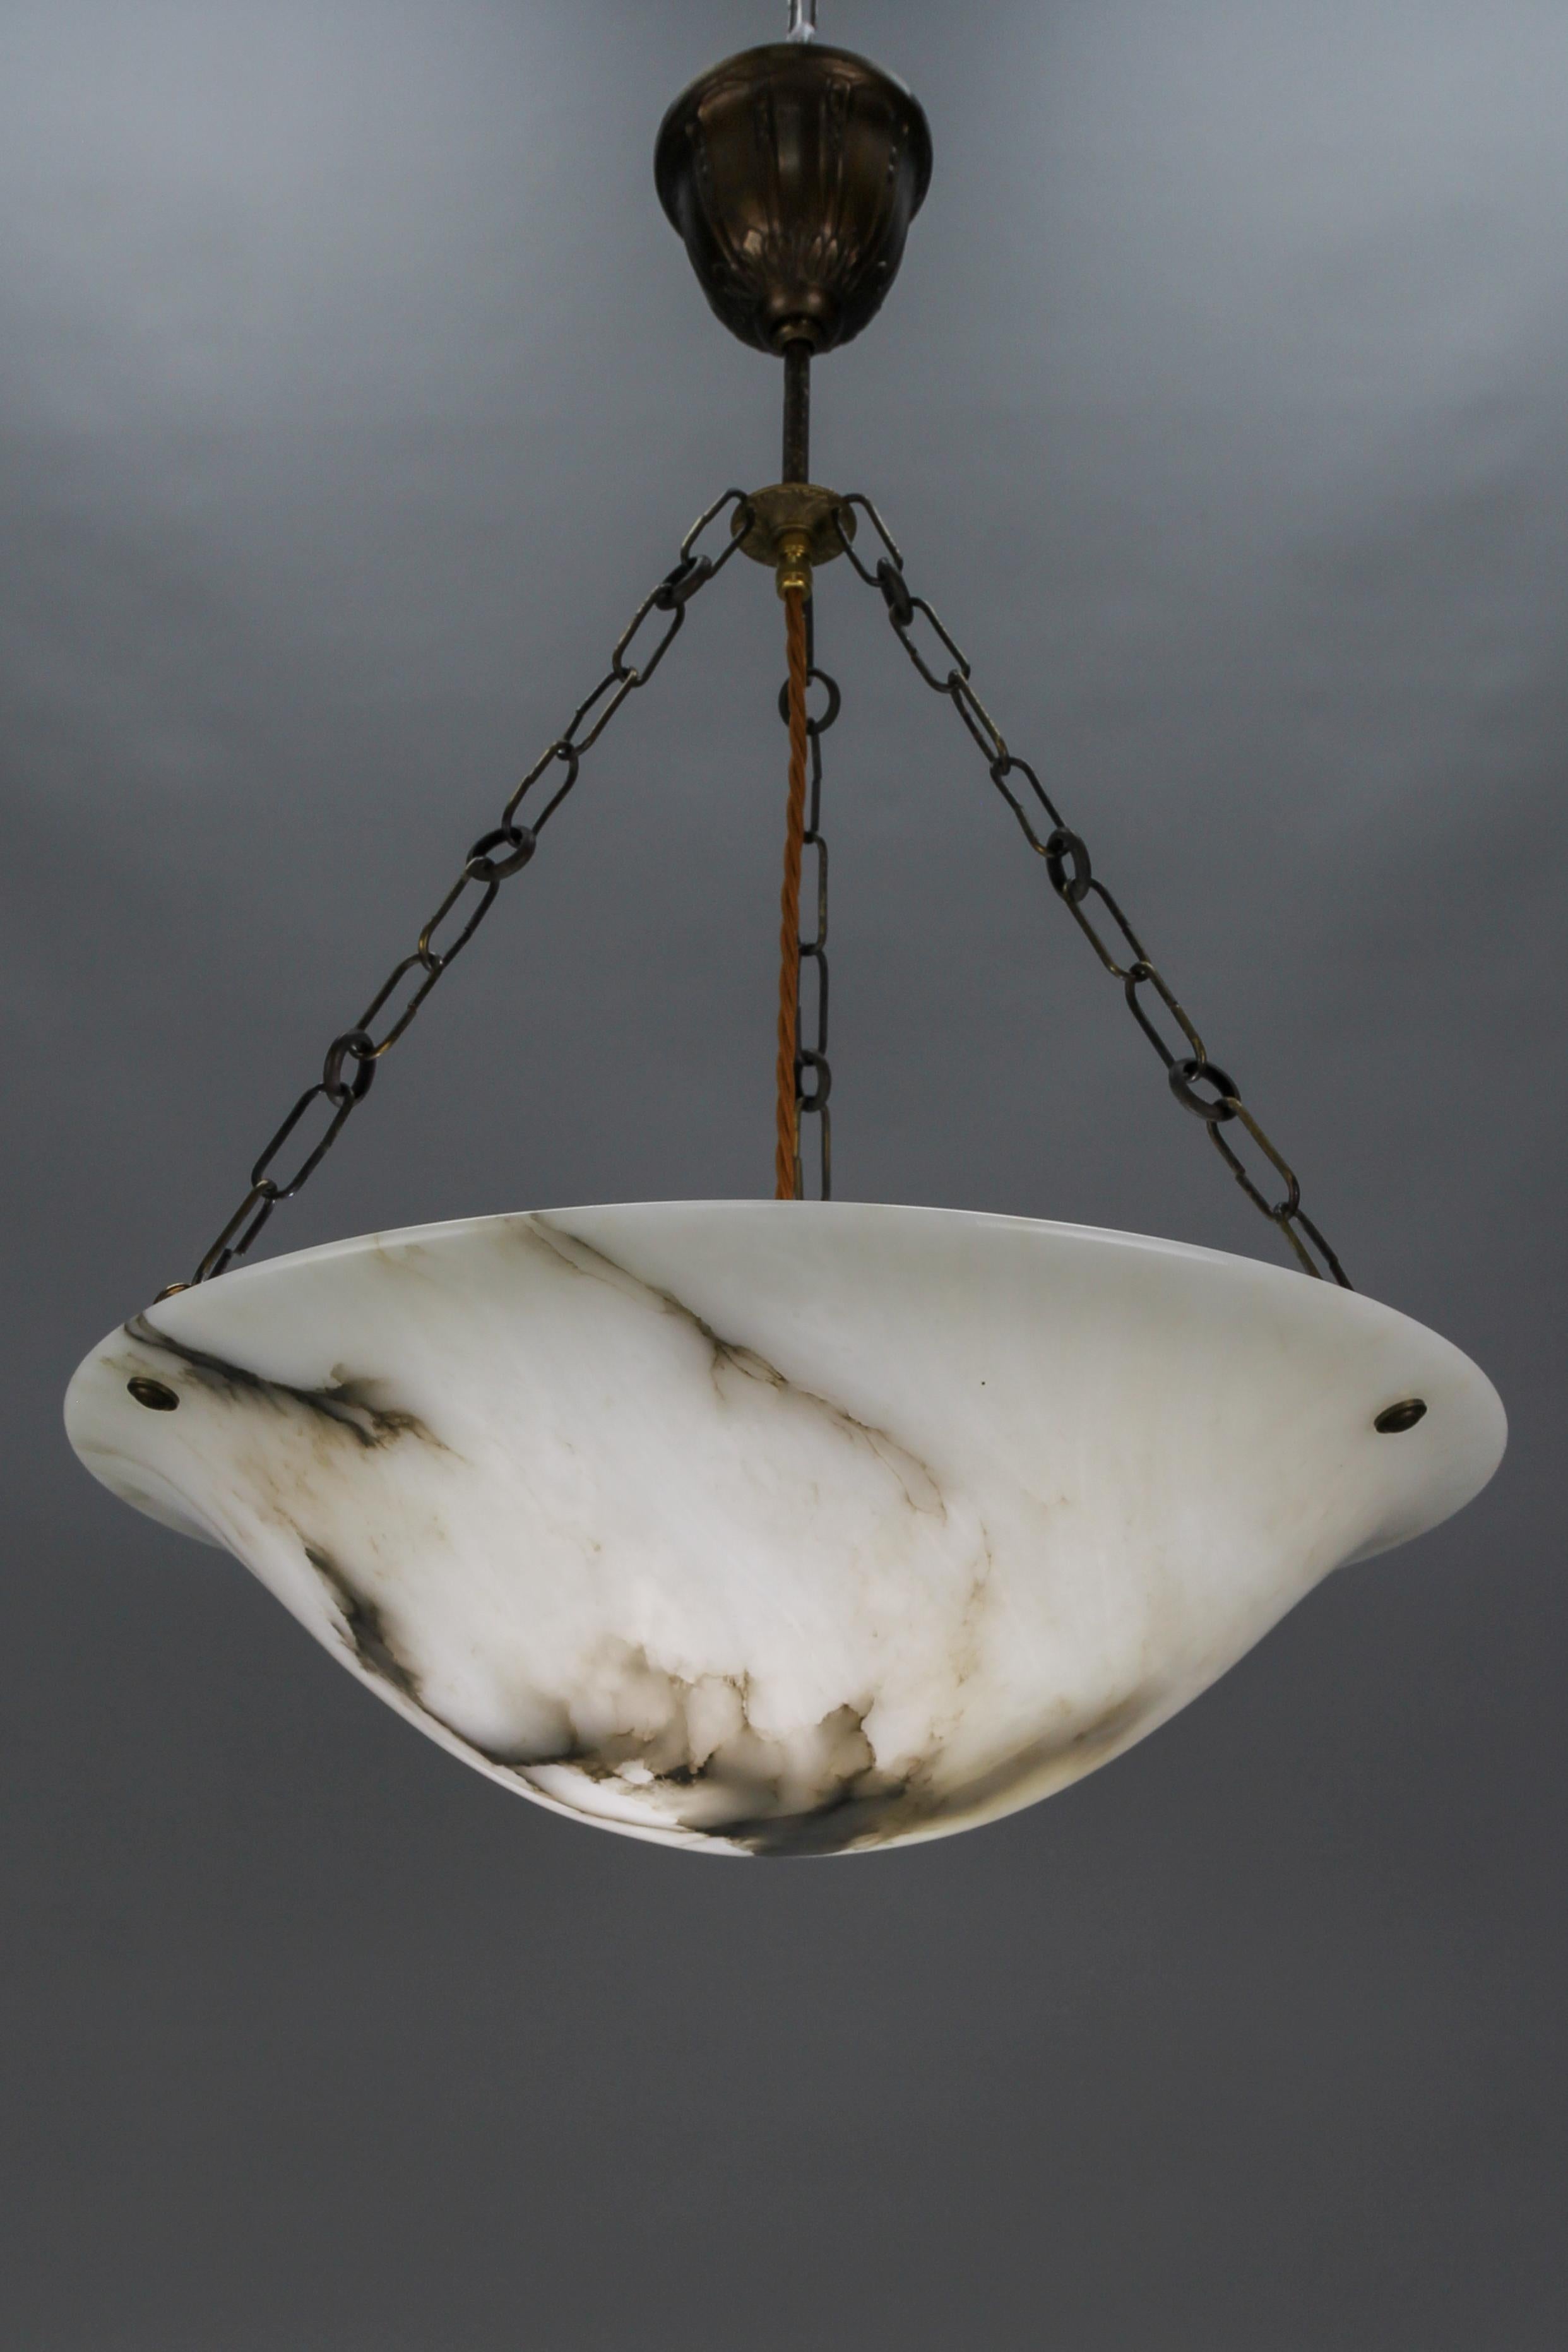 Antique French Art Deco black veined white alabaster pendant light fixture.
An elegant and large alabaster pendant ceiling light fixture from circa 1920. The beautifully veined white alabaster bowl is suspended by three chains.
The light shining